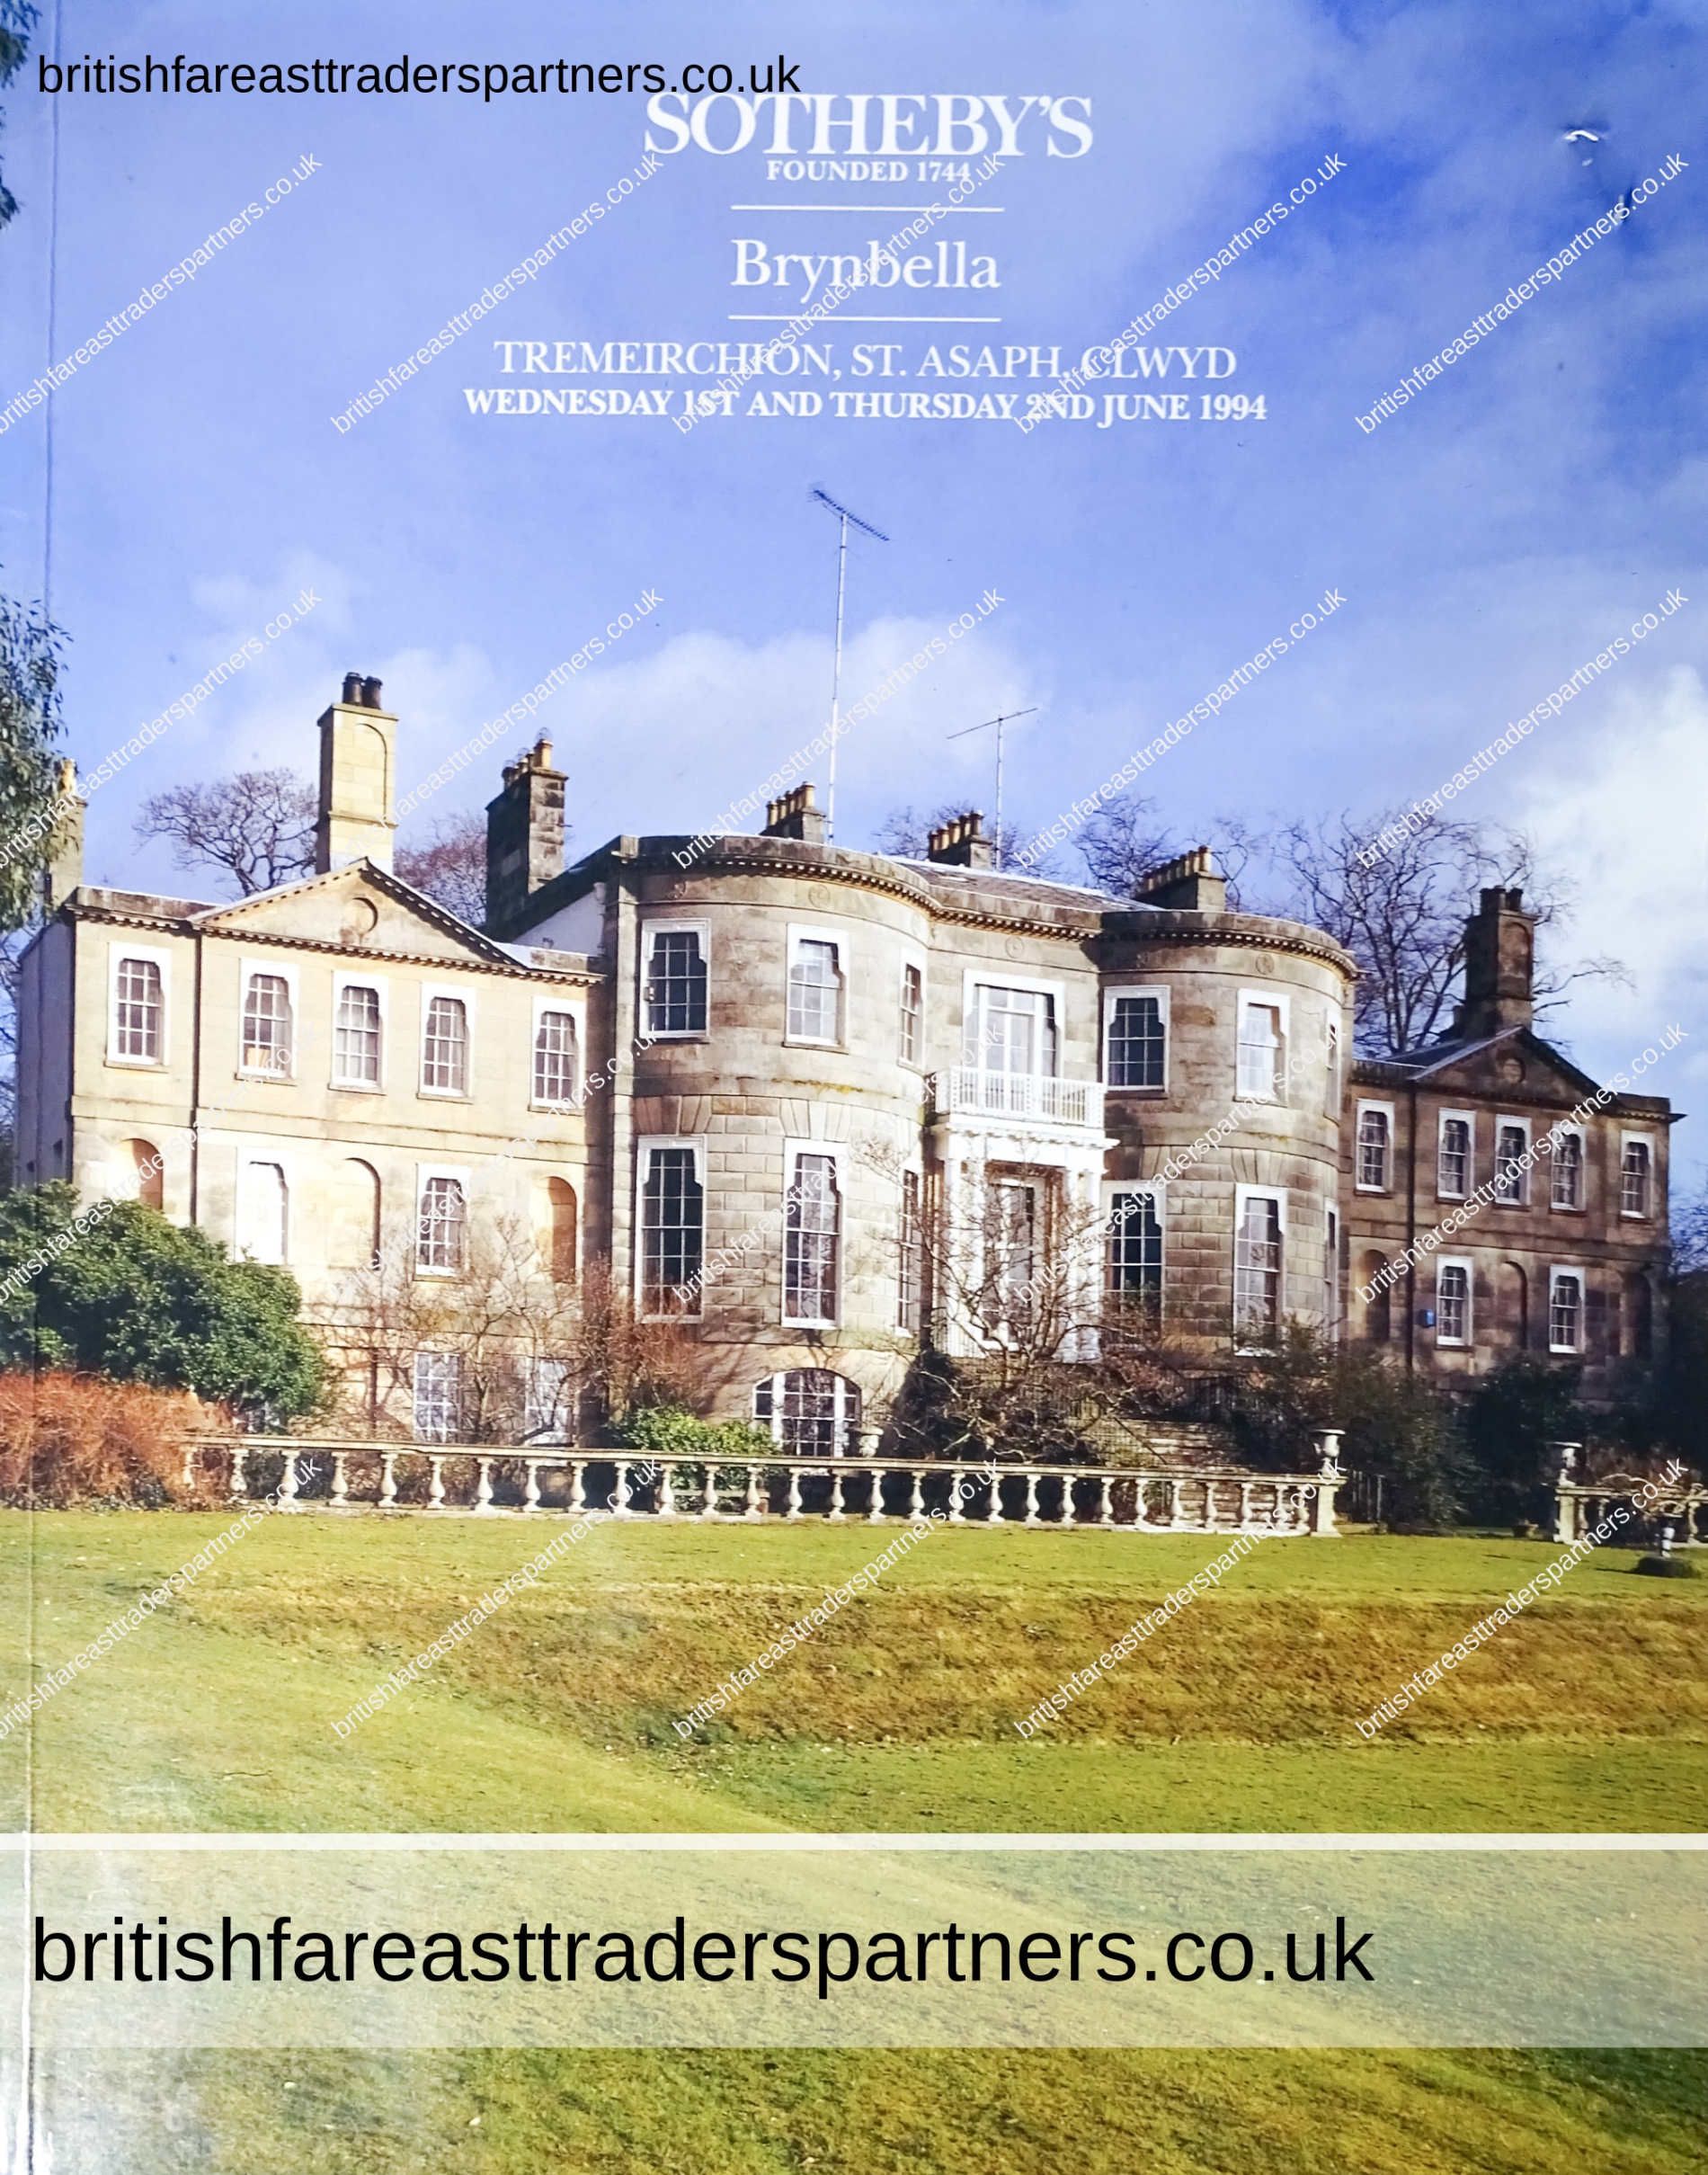 SOTHEBY’S FOUNDED 1774 BRYNBELLA TREMEIRCHION, ST. ASAPH CLWYD 1ST & 2ND JUNE 1994 BY DIRECTION OF THE EXECUTORS OF THE LATE REGINALD FIELD GLAZEBROOK AND DAISY ISABEL GLAZEBROOK AUCTION Catalogue